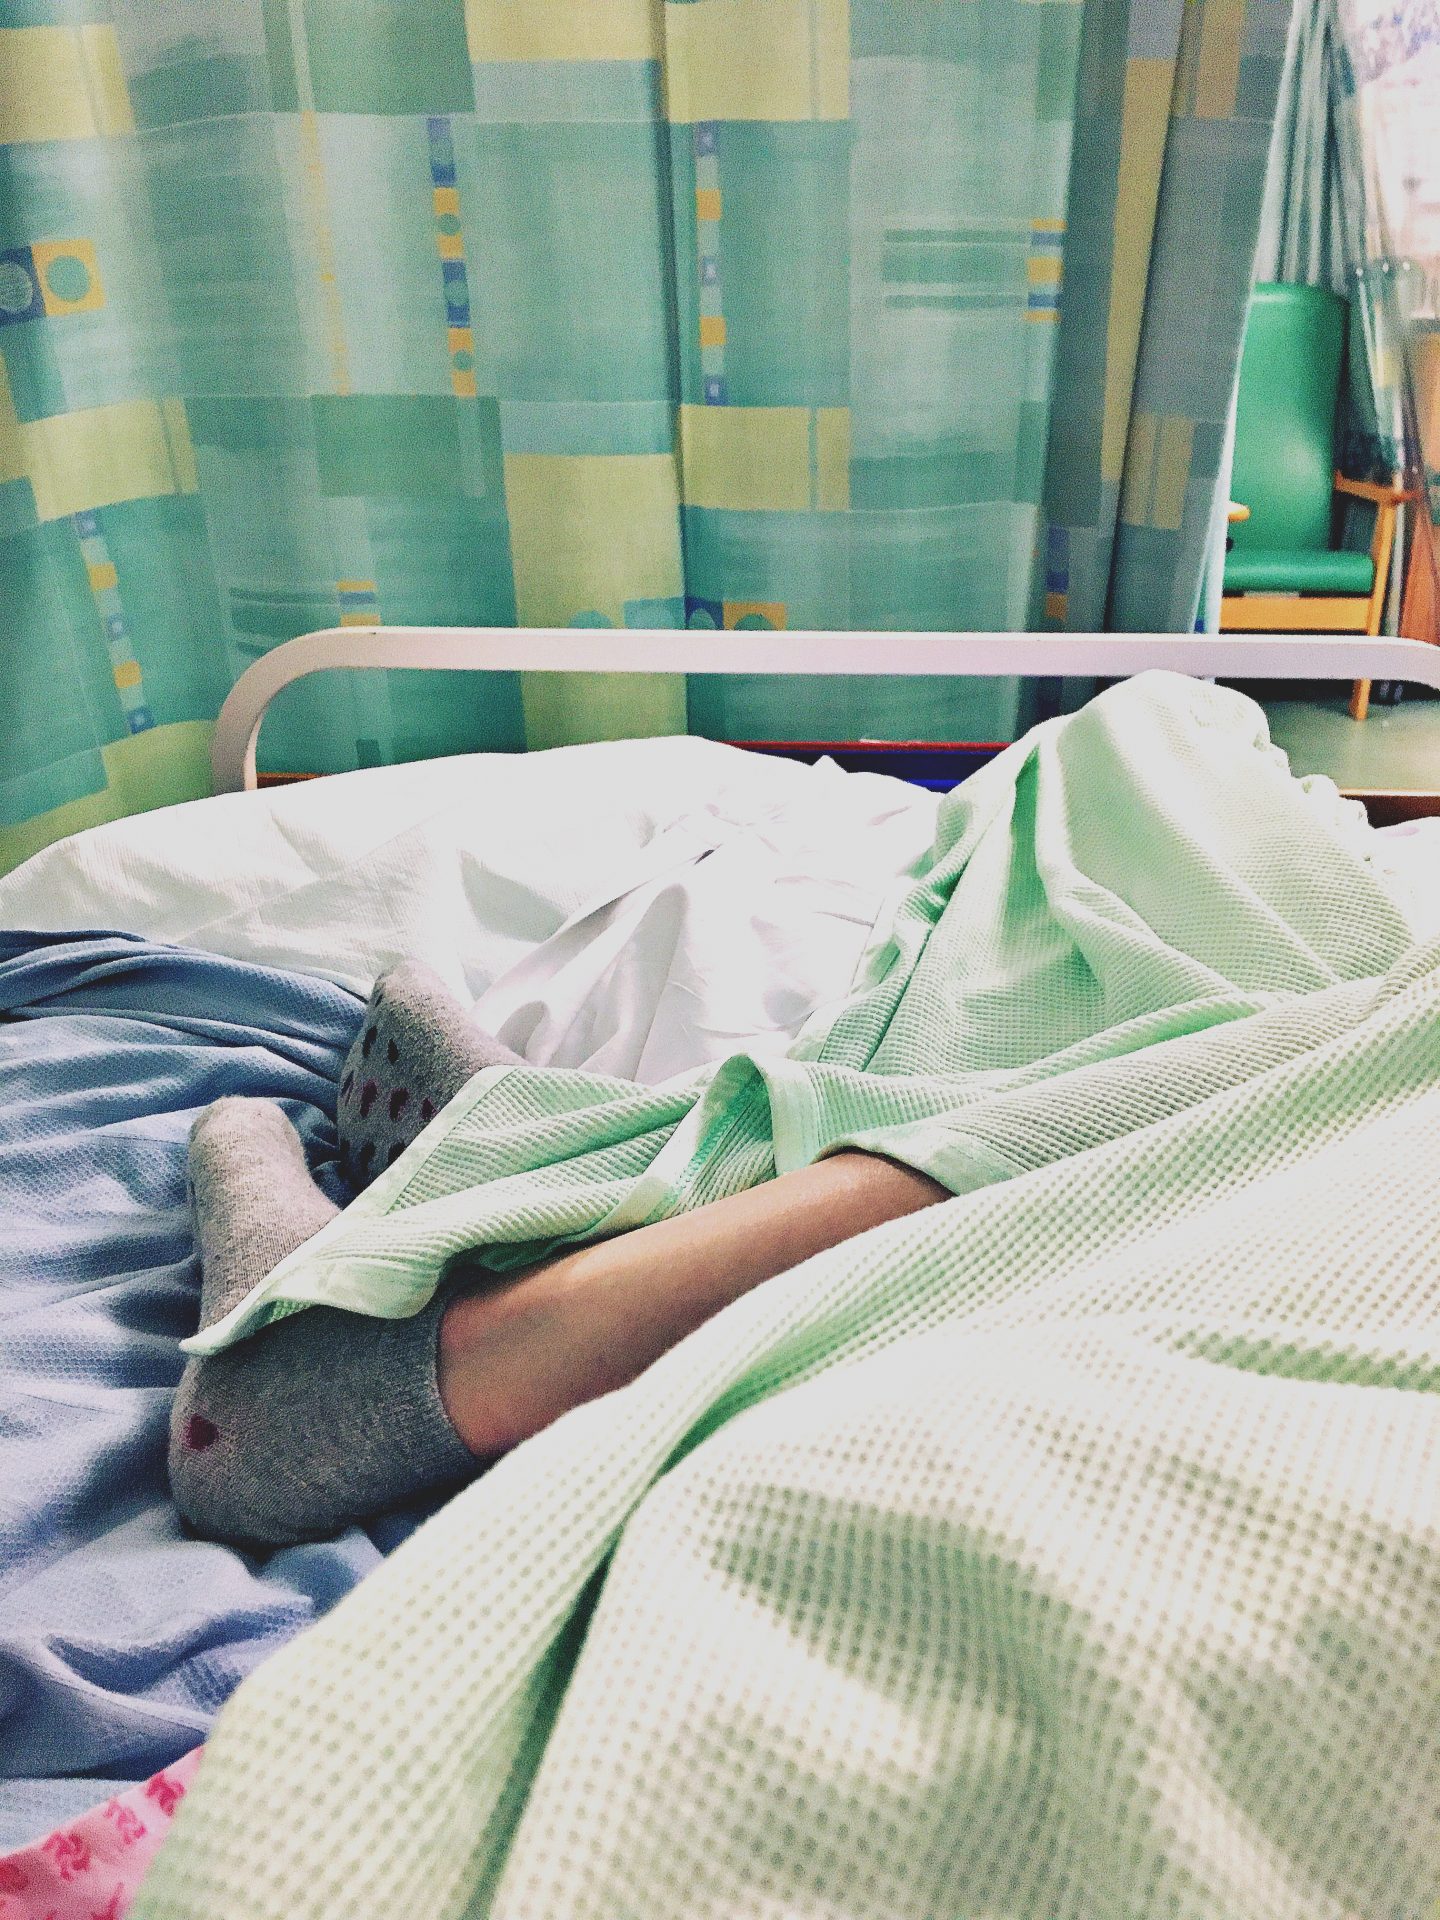 A photo I took looking town at my legs wrapped in green and blue blankets on the bed in the ward after my A&E admission.